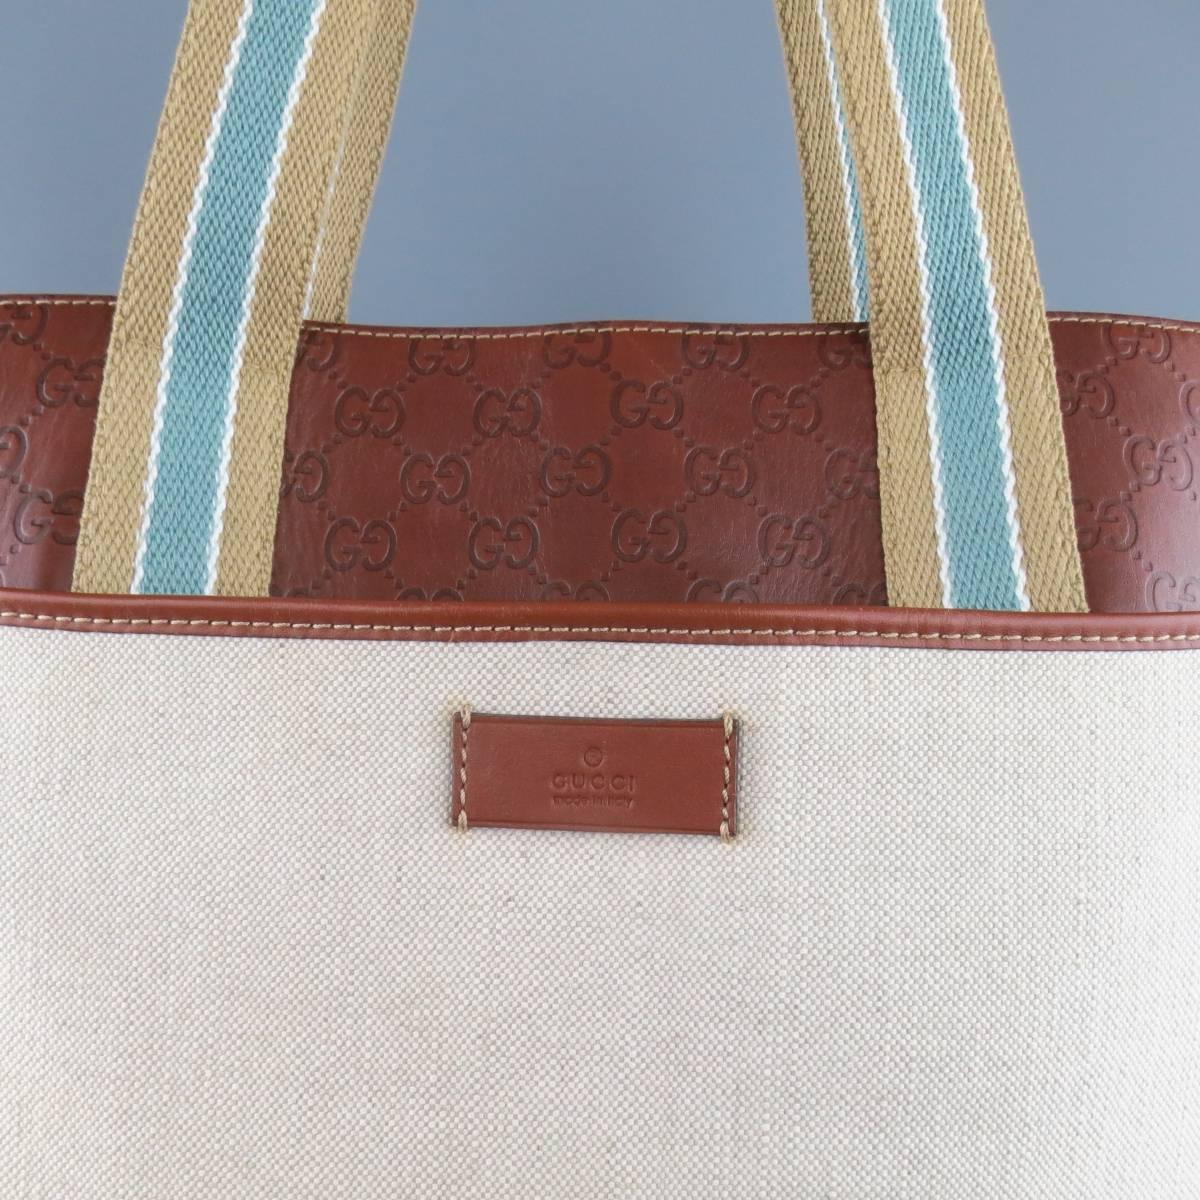 GUCCI tote bag comes in light beige canvas and features tan brown Guccissima monogram embossed leather, front and back snap pockets, internal storage pockets, and beige and teal stripped webbing handles with leather grips. Wear throughout leather